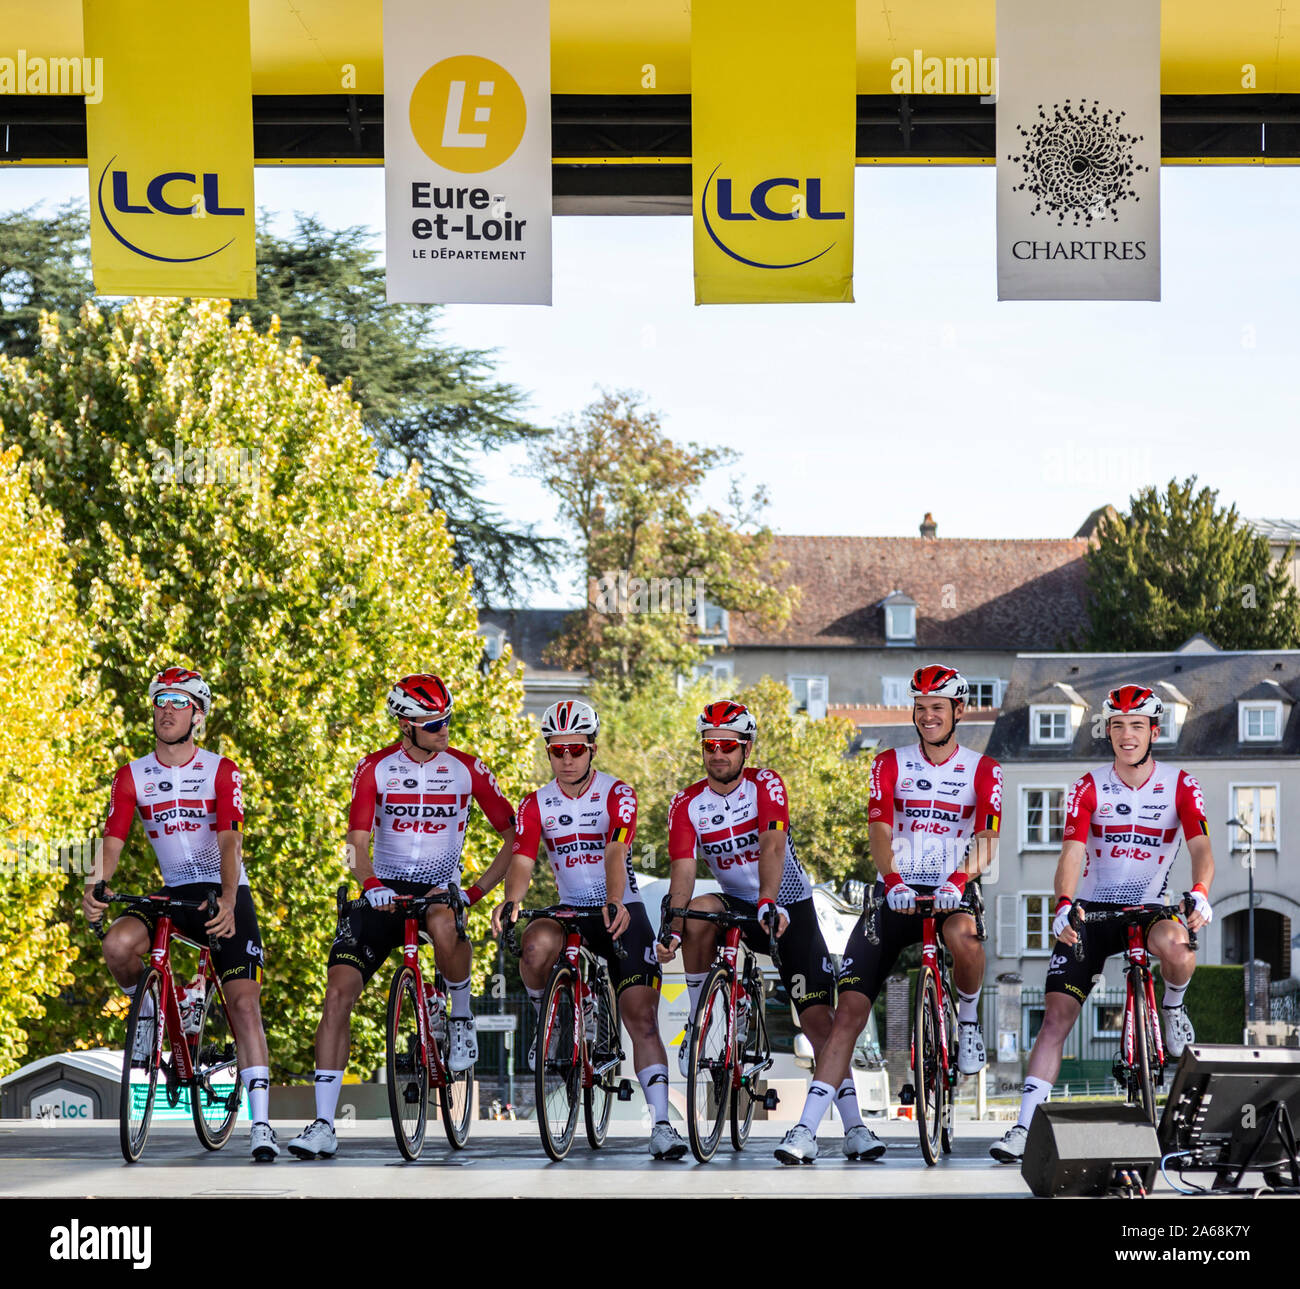 Chartres, France - October 13, 2019: Team Lotto-Soudal is on the podium in Chartres, during the teams presentation before the autumn French cycling race Paris-Tours 2019. Jelle Wallays won this race. Stock Photo